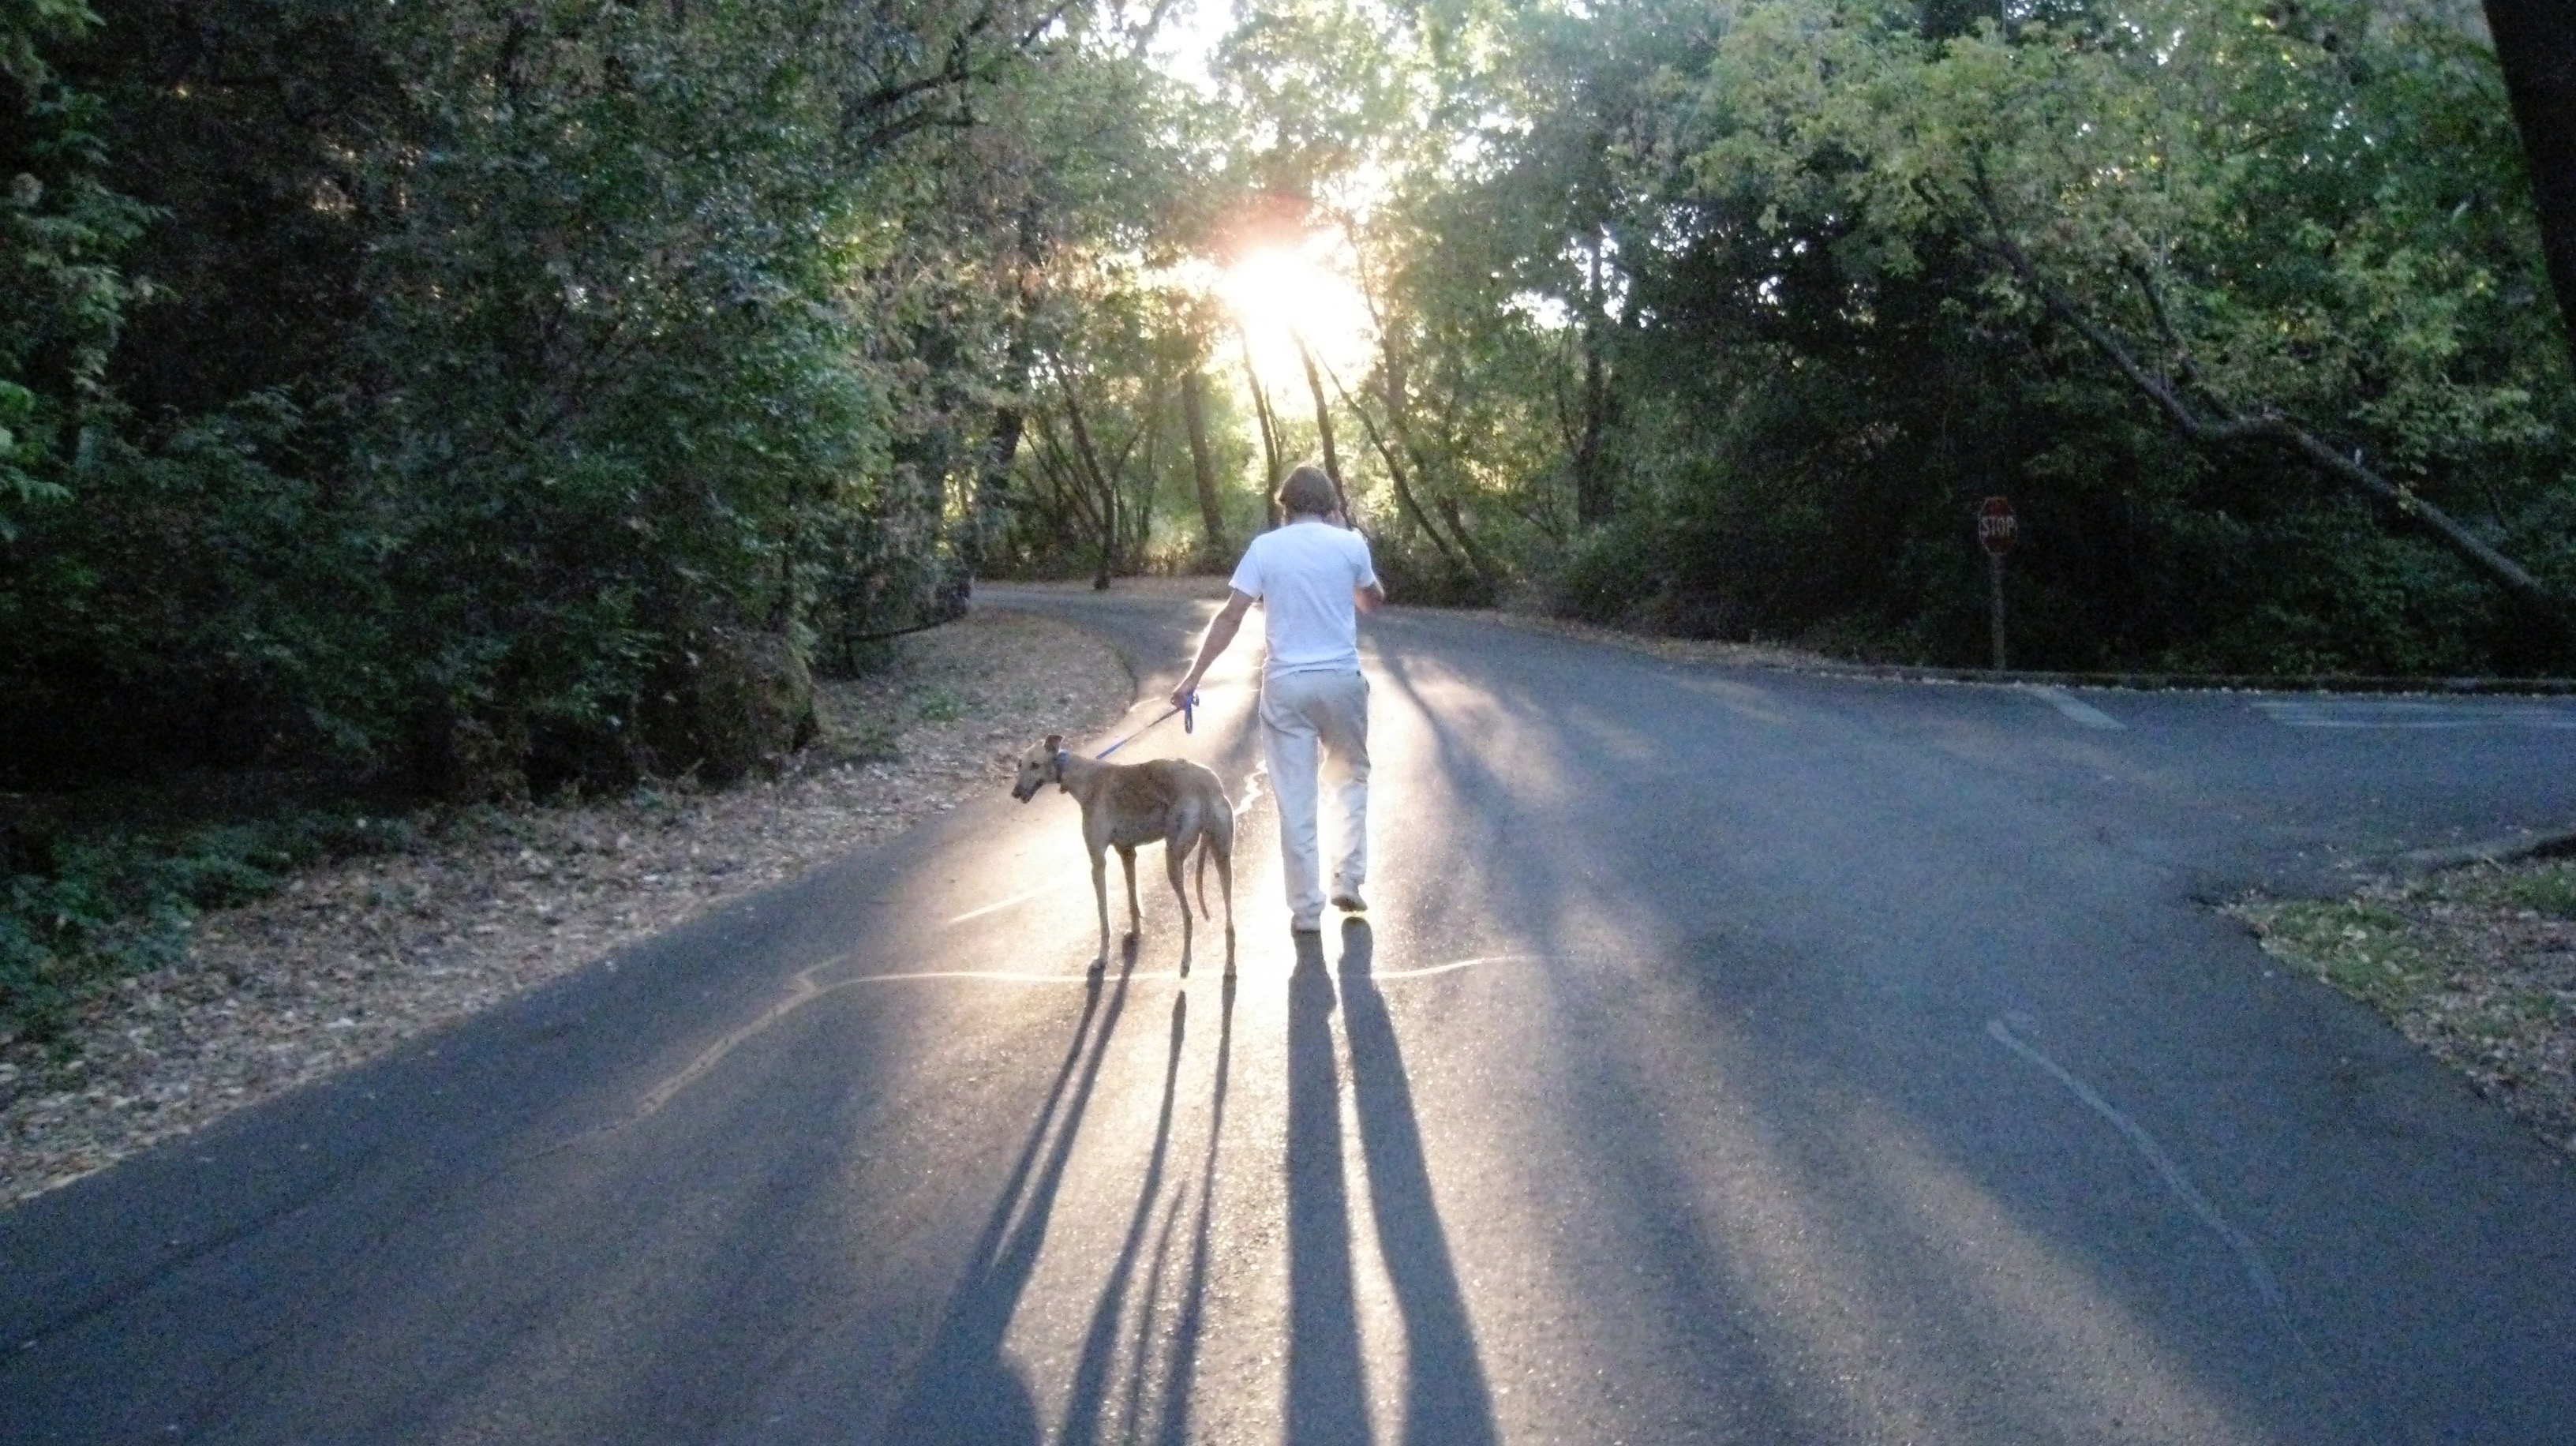 Dan and his dog Sonny walkiin down the road into the sunset. Sonny looking back behind him, as if saying goodbye 